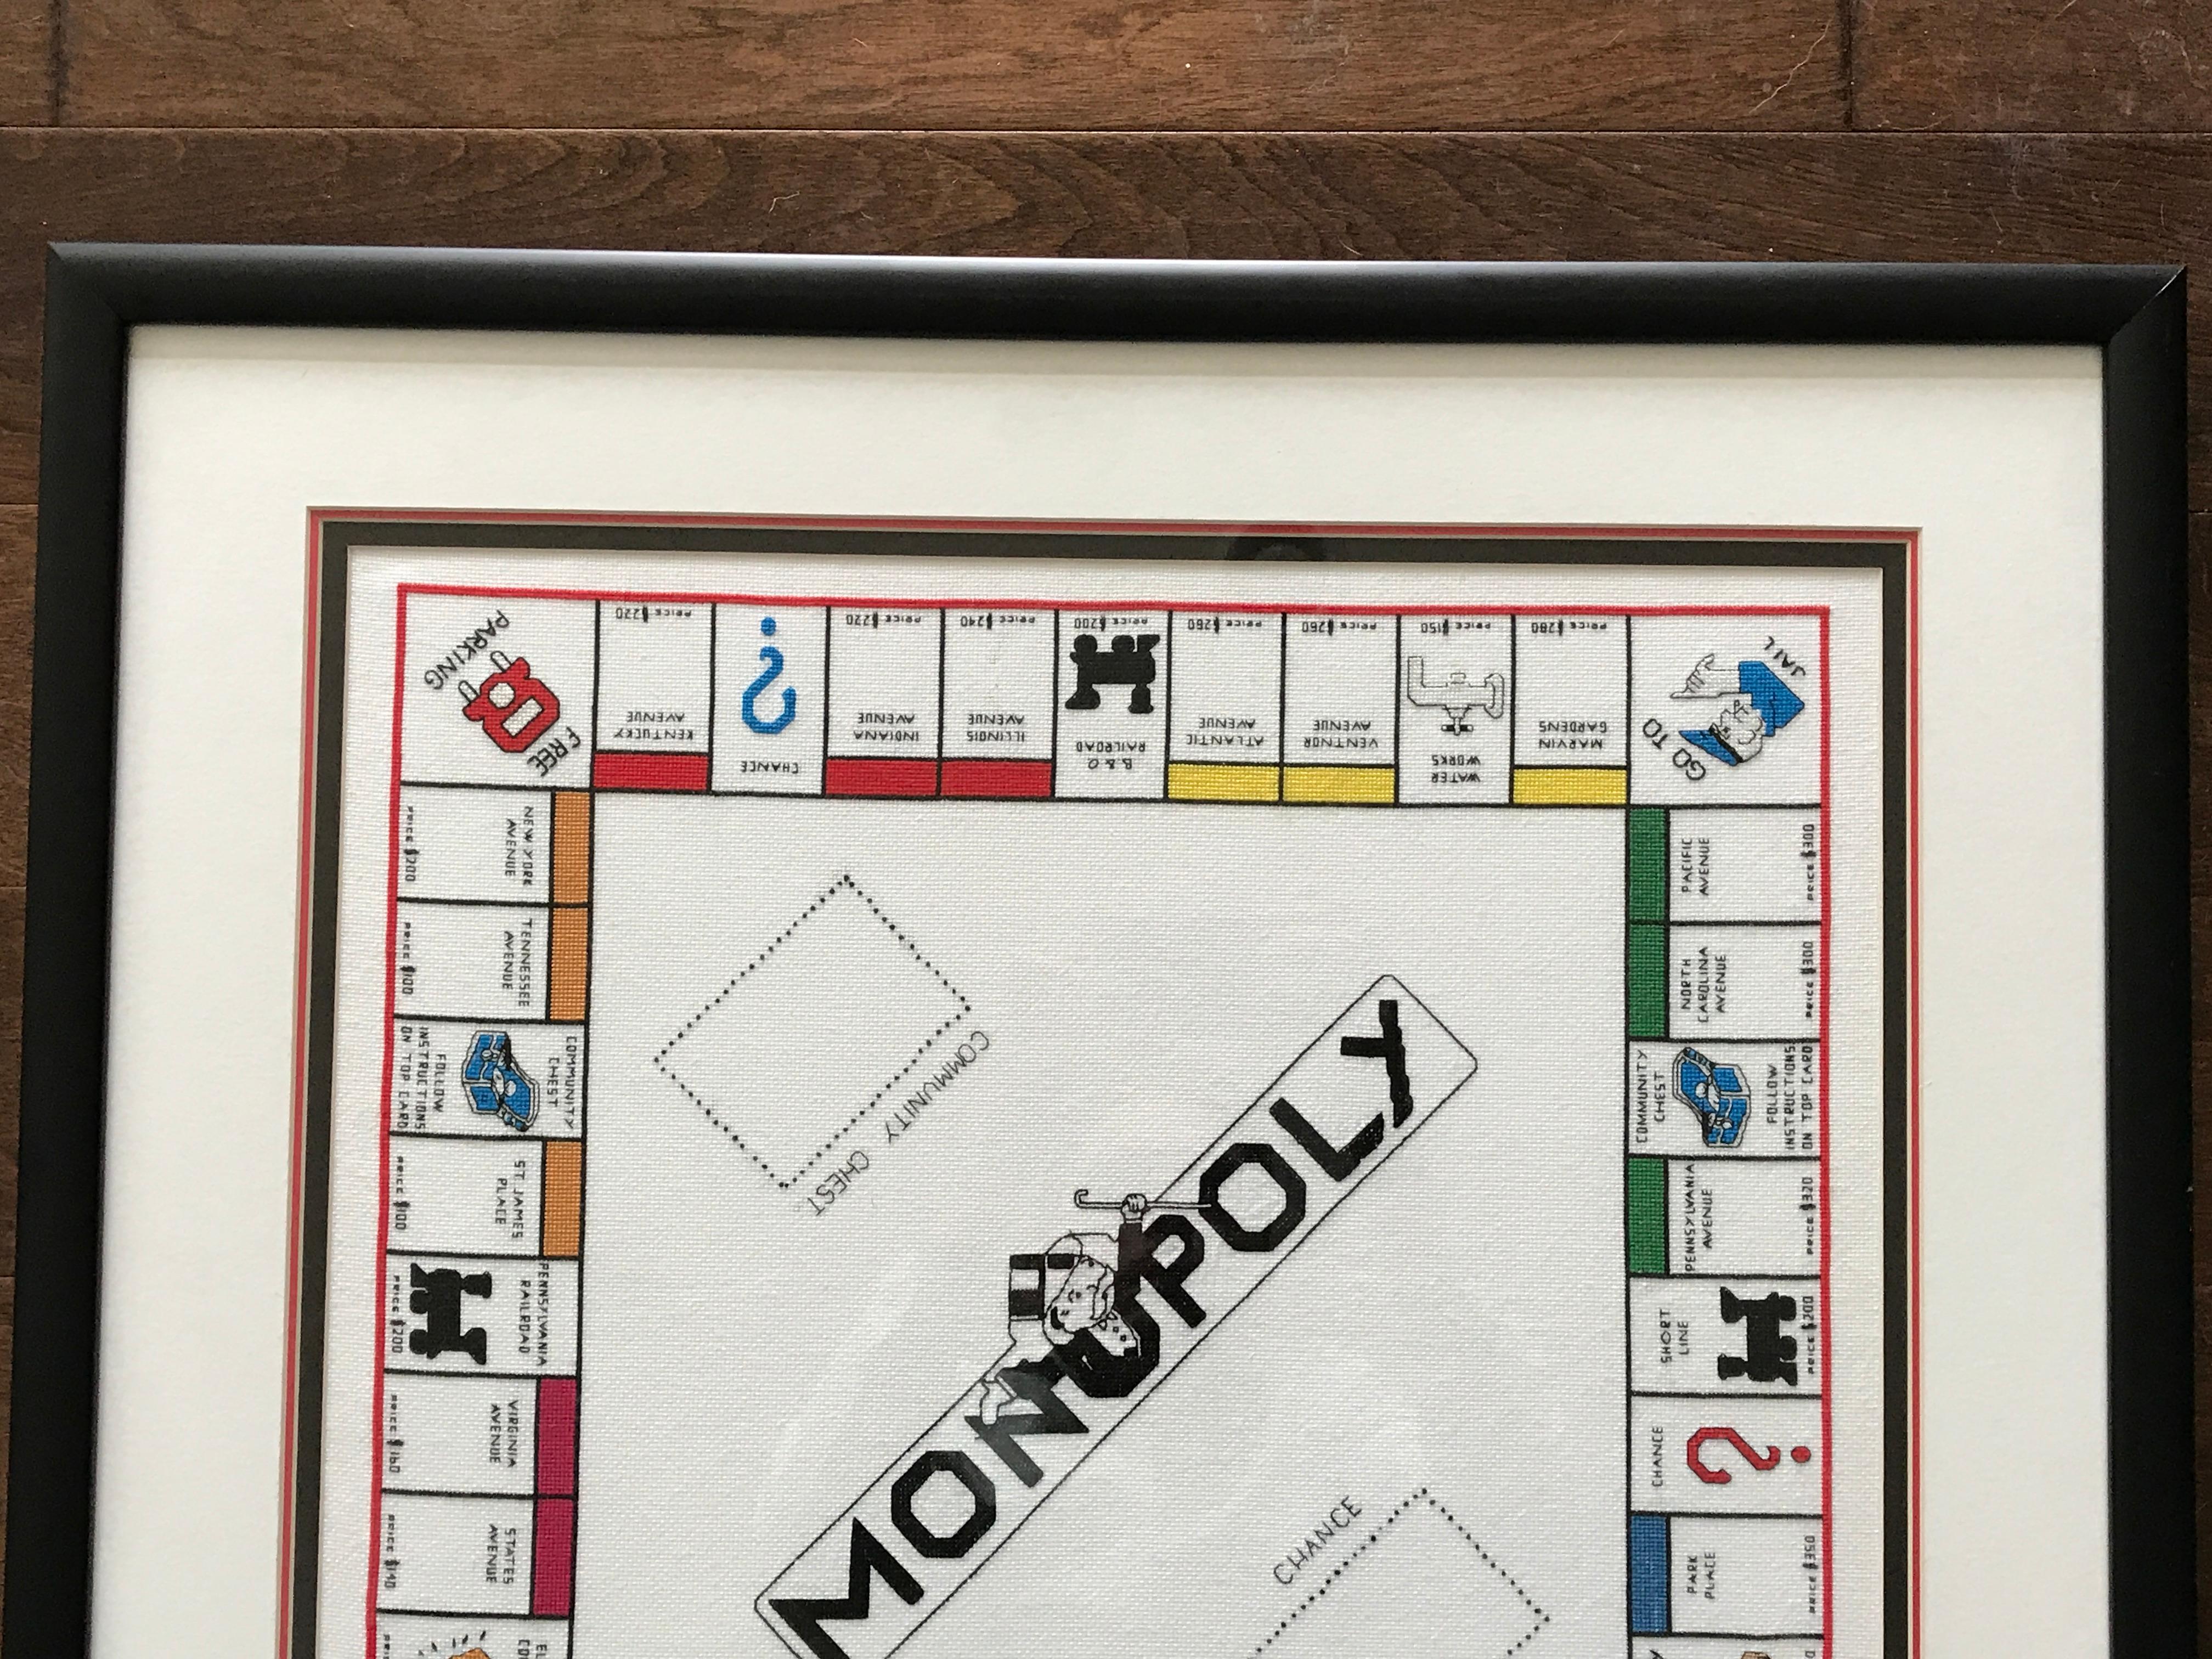 Offered is a stunning, 1970s framed needlepoint of a Classic 'Monopoly' board. Newly framed and matted -- wood frame with a matte finish black lacquer. The piece has been finished with a primarily white mat with black and red accenting mats. Actual